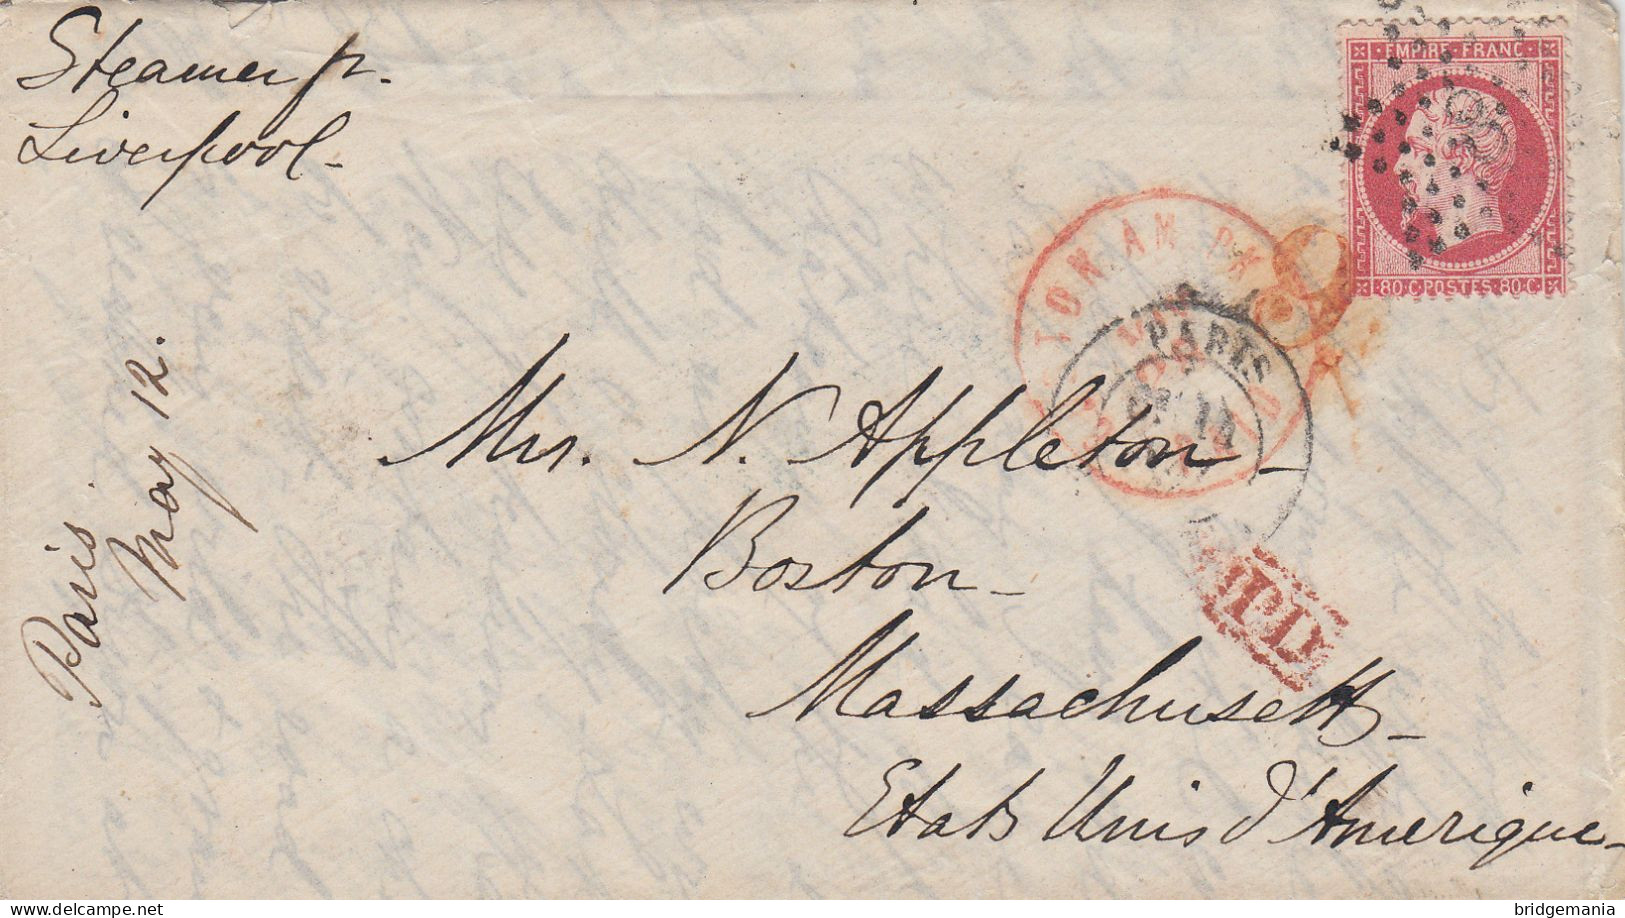 MTM141 - 1867 TRANSATLANTIC LETTER FRANCE TO USA Steamer CITY OF BOSTON THE INMAN LINE - PAID - Marcophilie